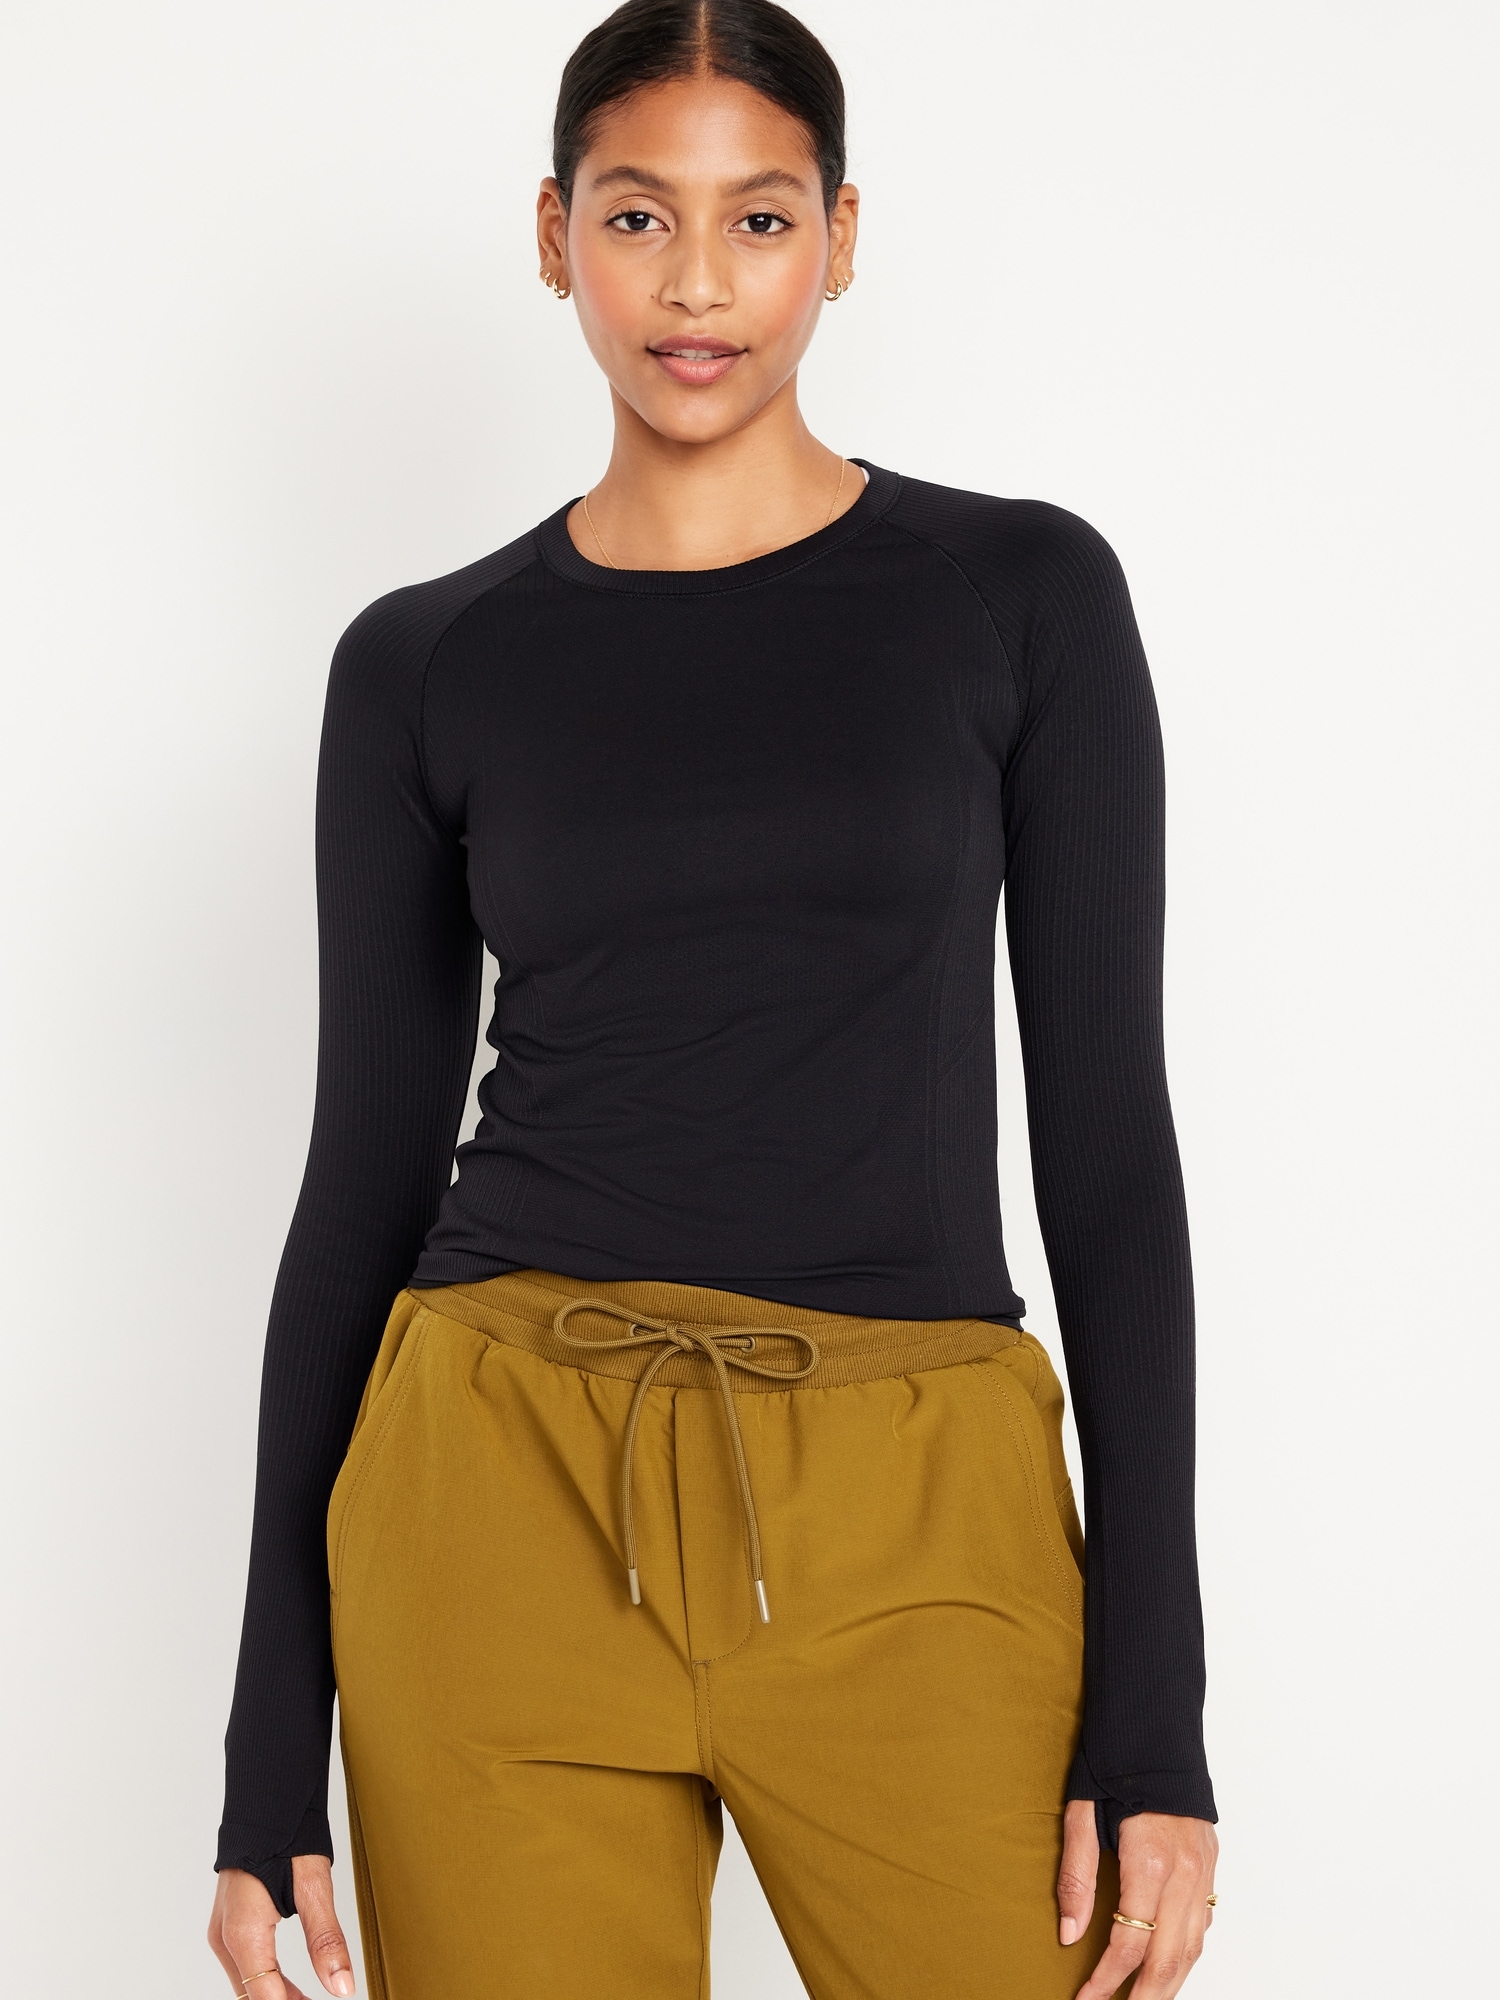 Women's Long-Sleeve Cotton-Blend Seamless Fabric Cropped Tee